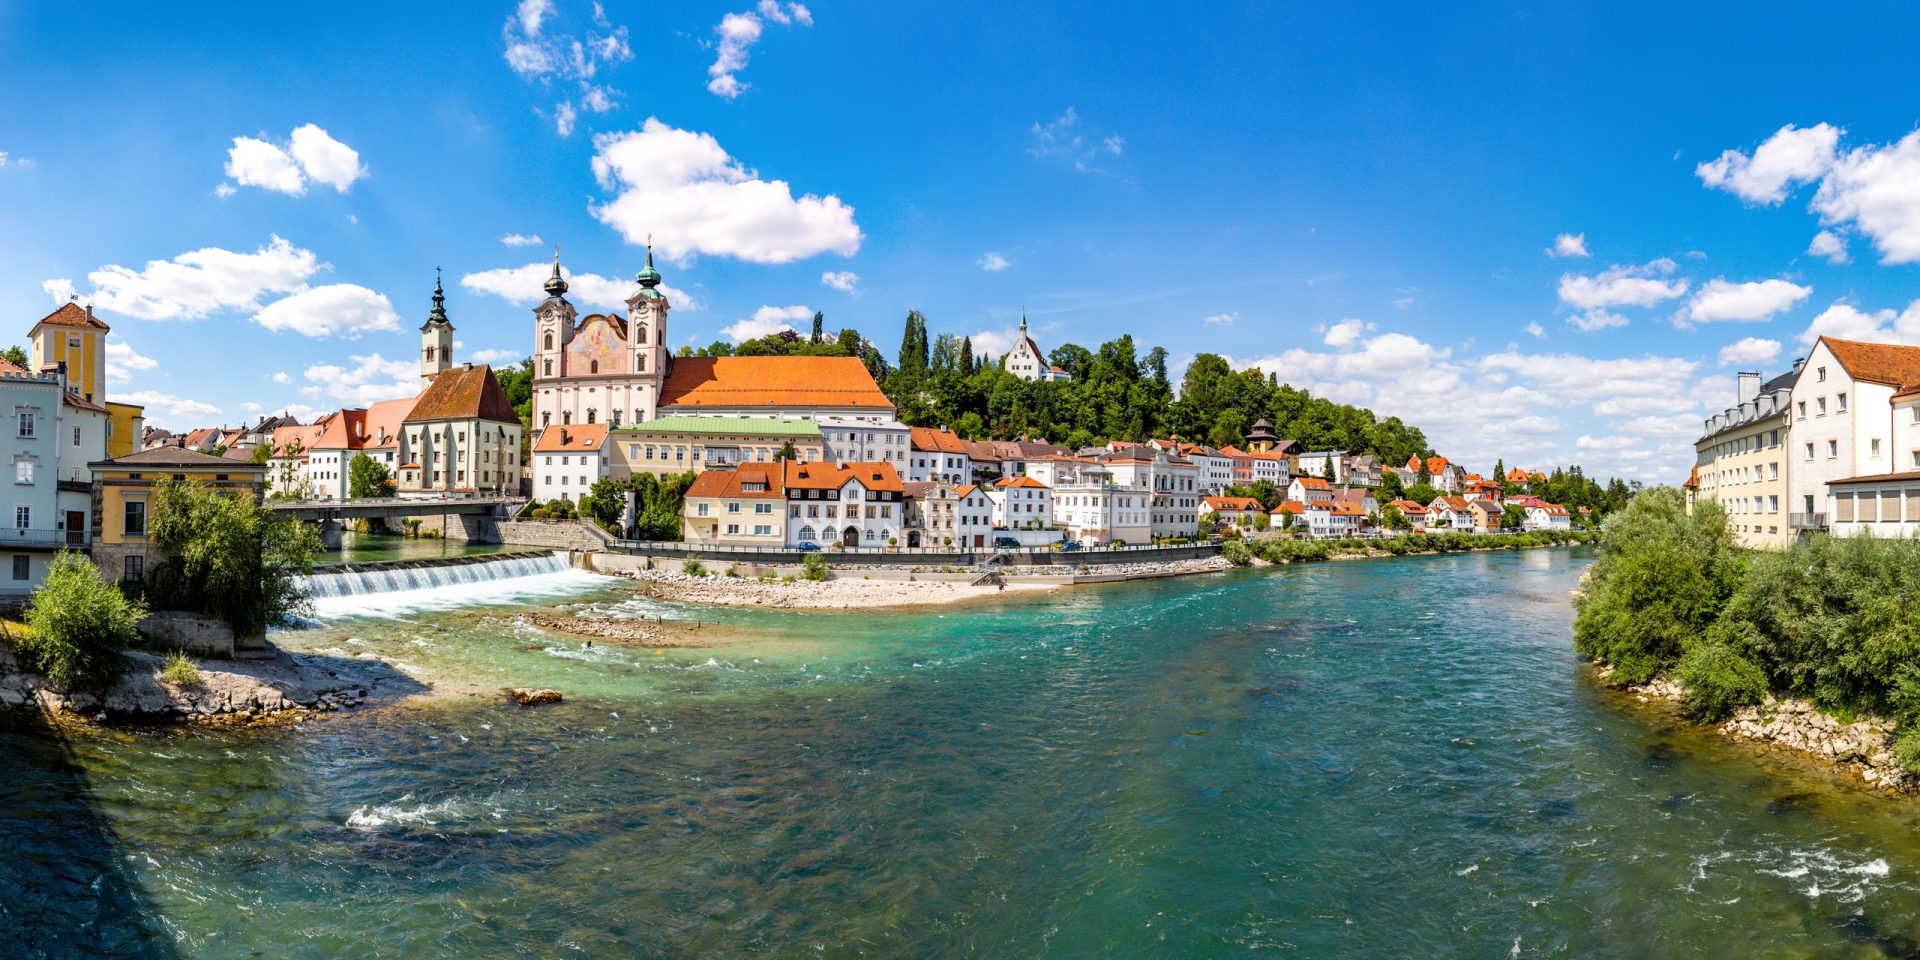 The photo shows a photograph of the town of Steyr.